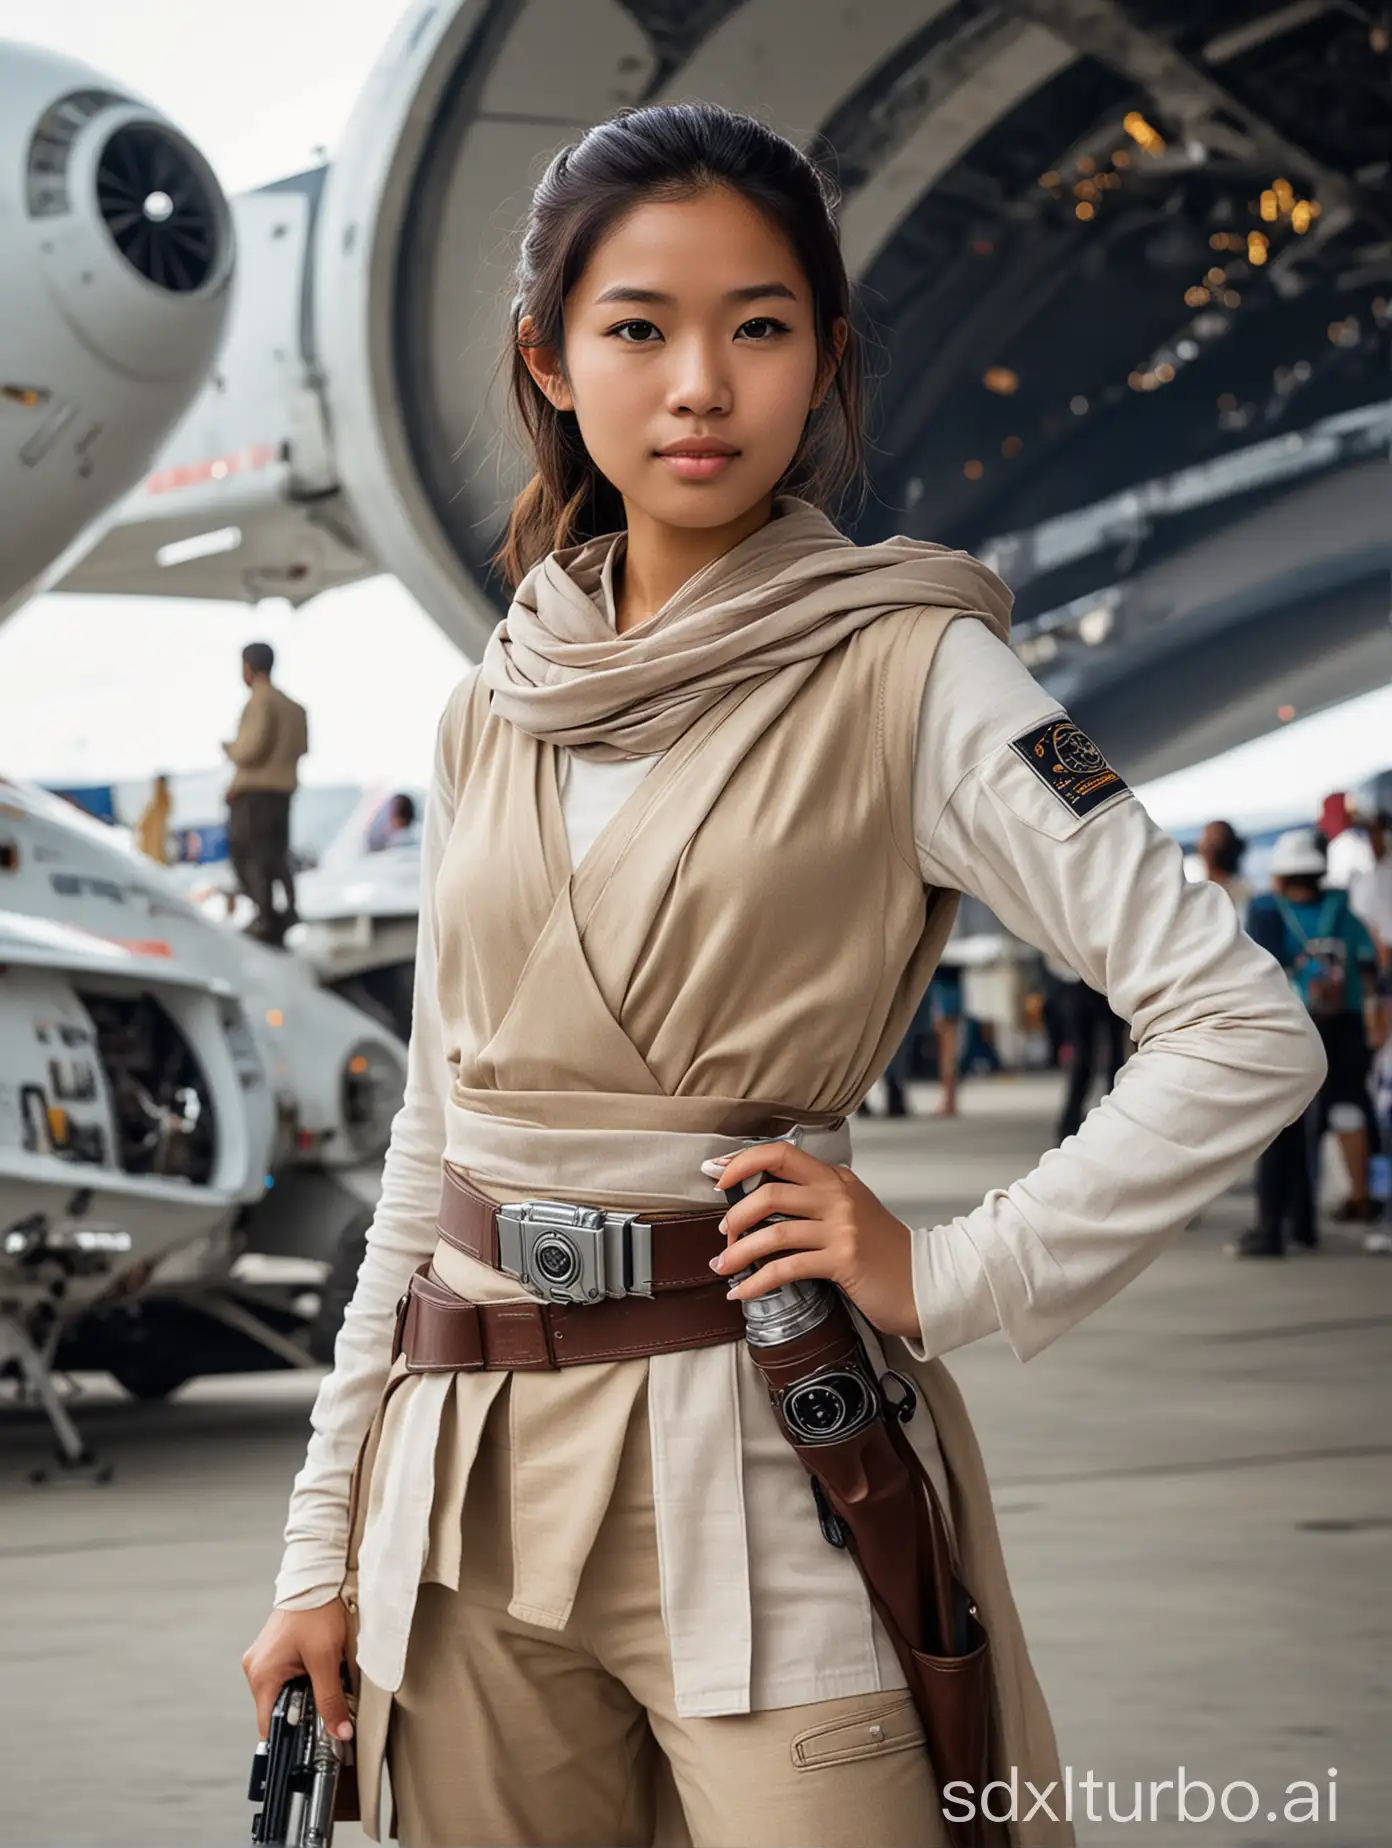 jedi girl, age 16, southeast Asian, at a spaceport